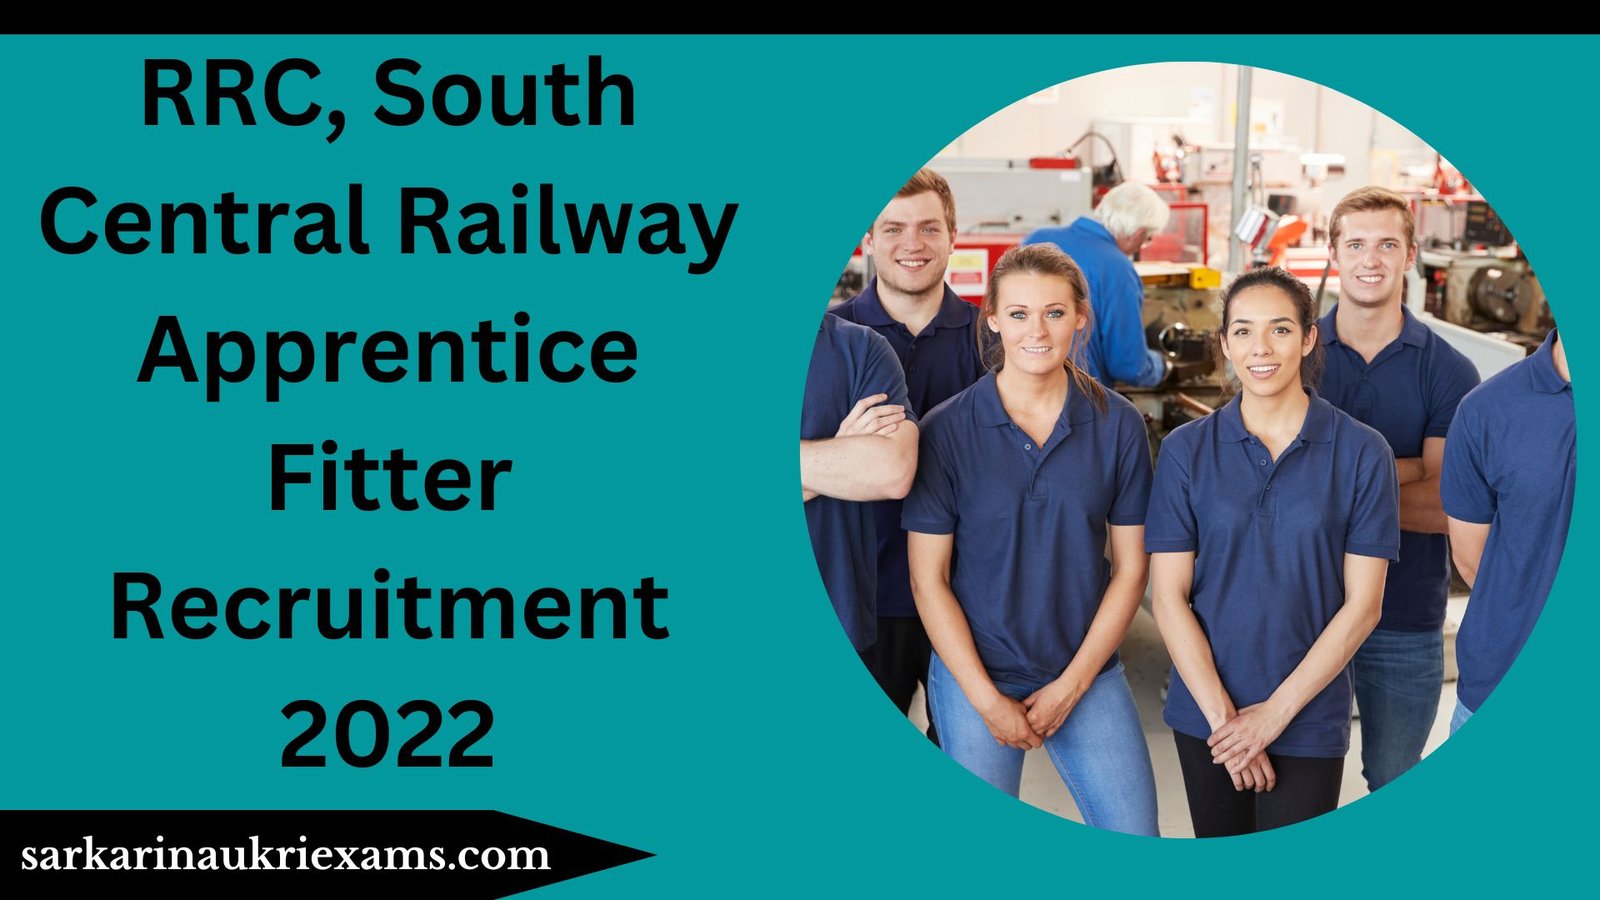 RRC, South Central Railway Apprentice Fitter Recruitment 2022 | 4103 Post Vacancy